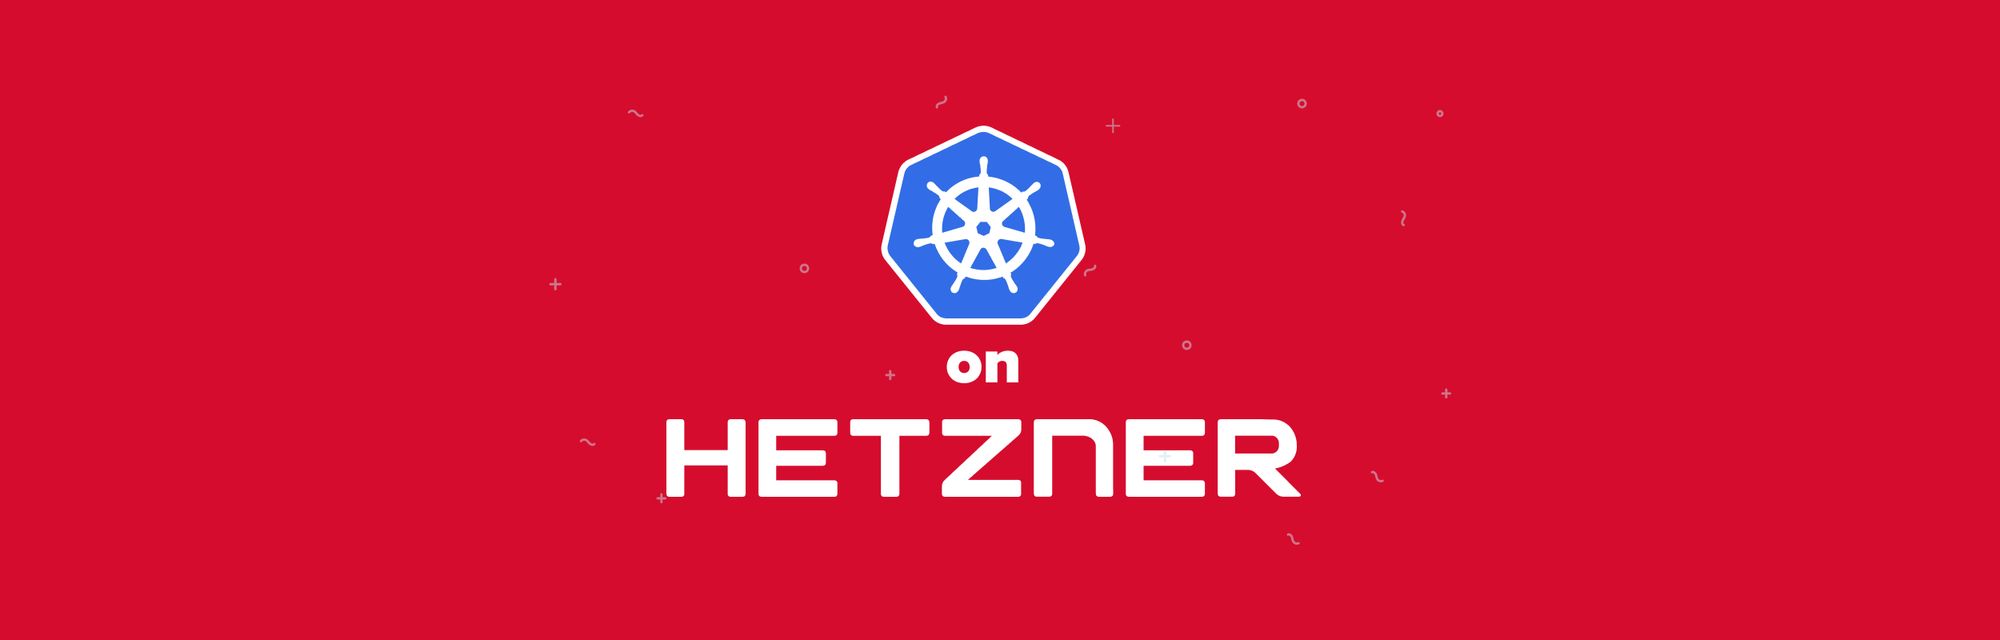 Install a Kubernetes cluster on Hetzner in 5 minutes (+ Monitoring)